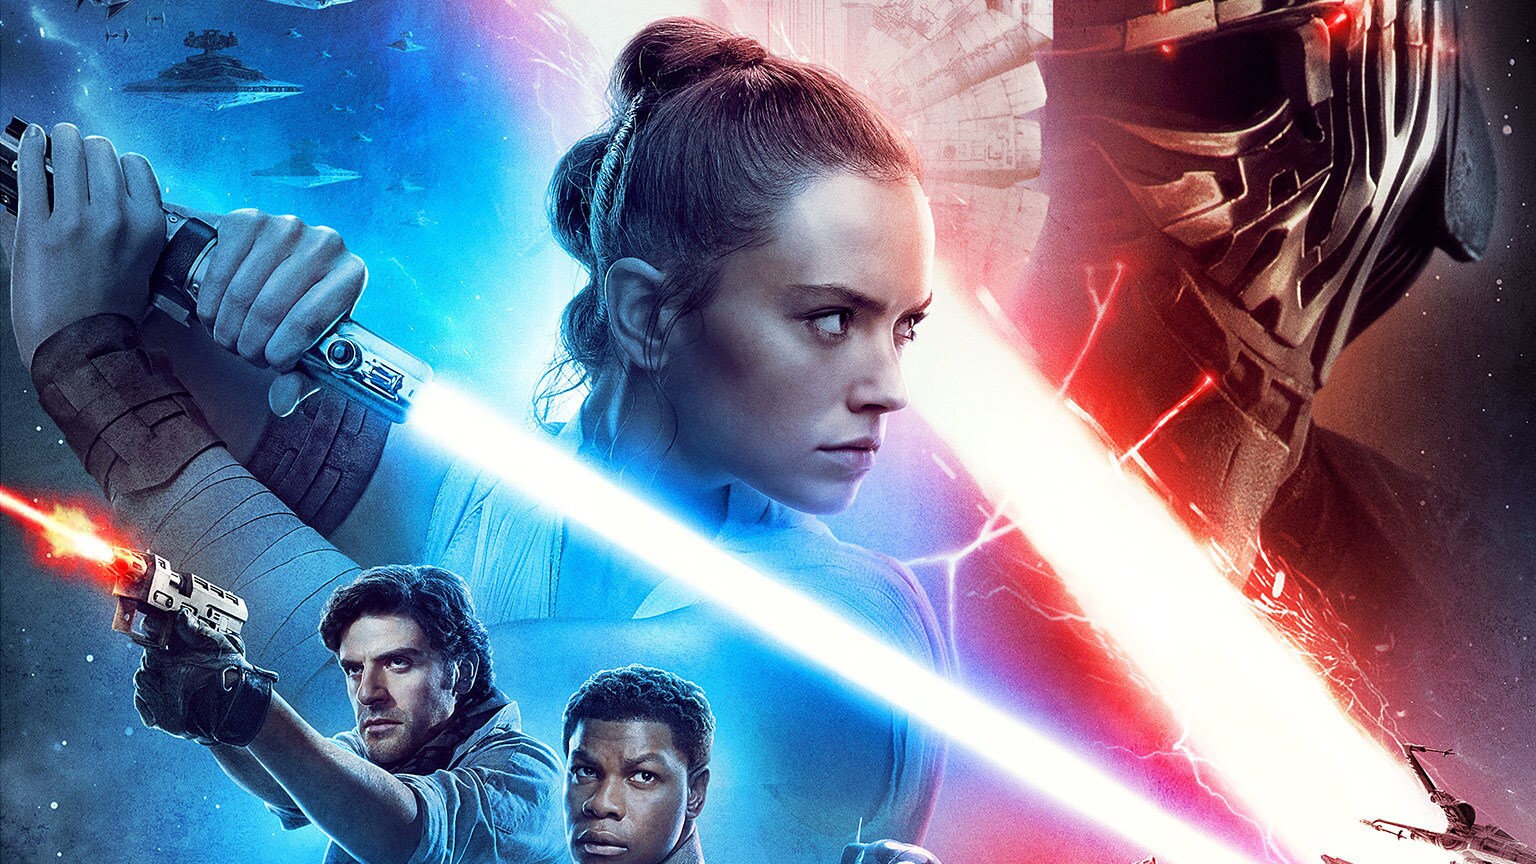 See the Official Star Wars: The Rise of Skywalker Theatrical Poster